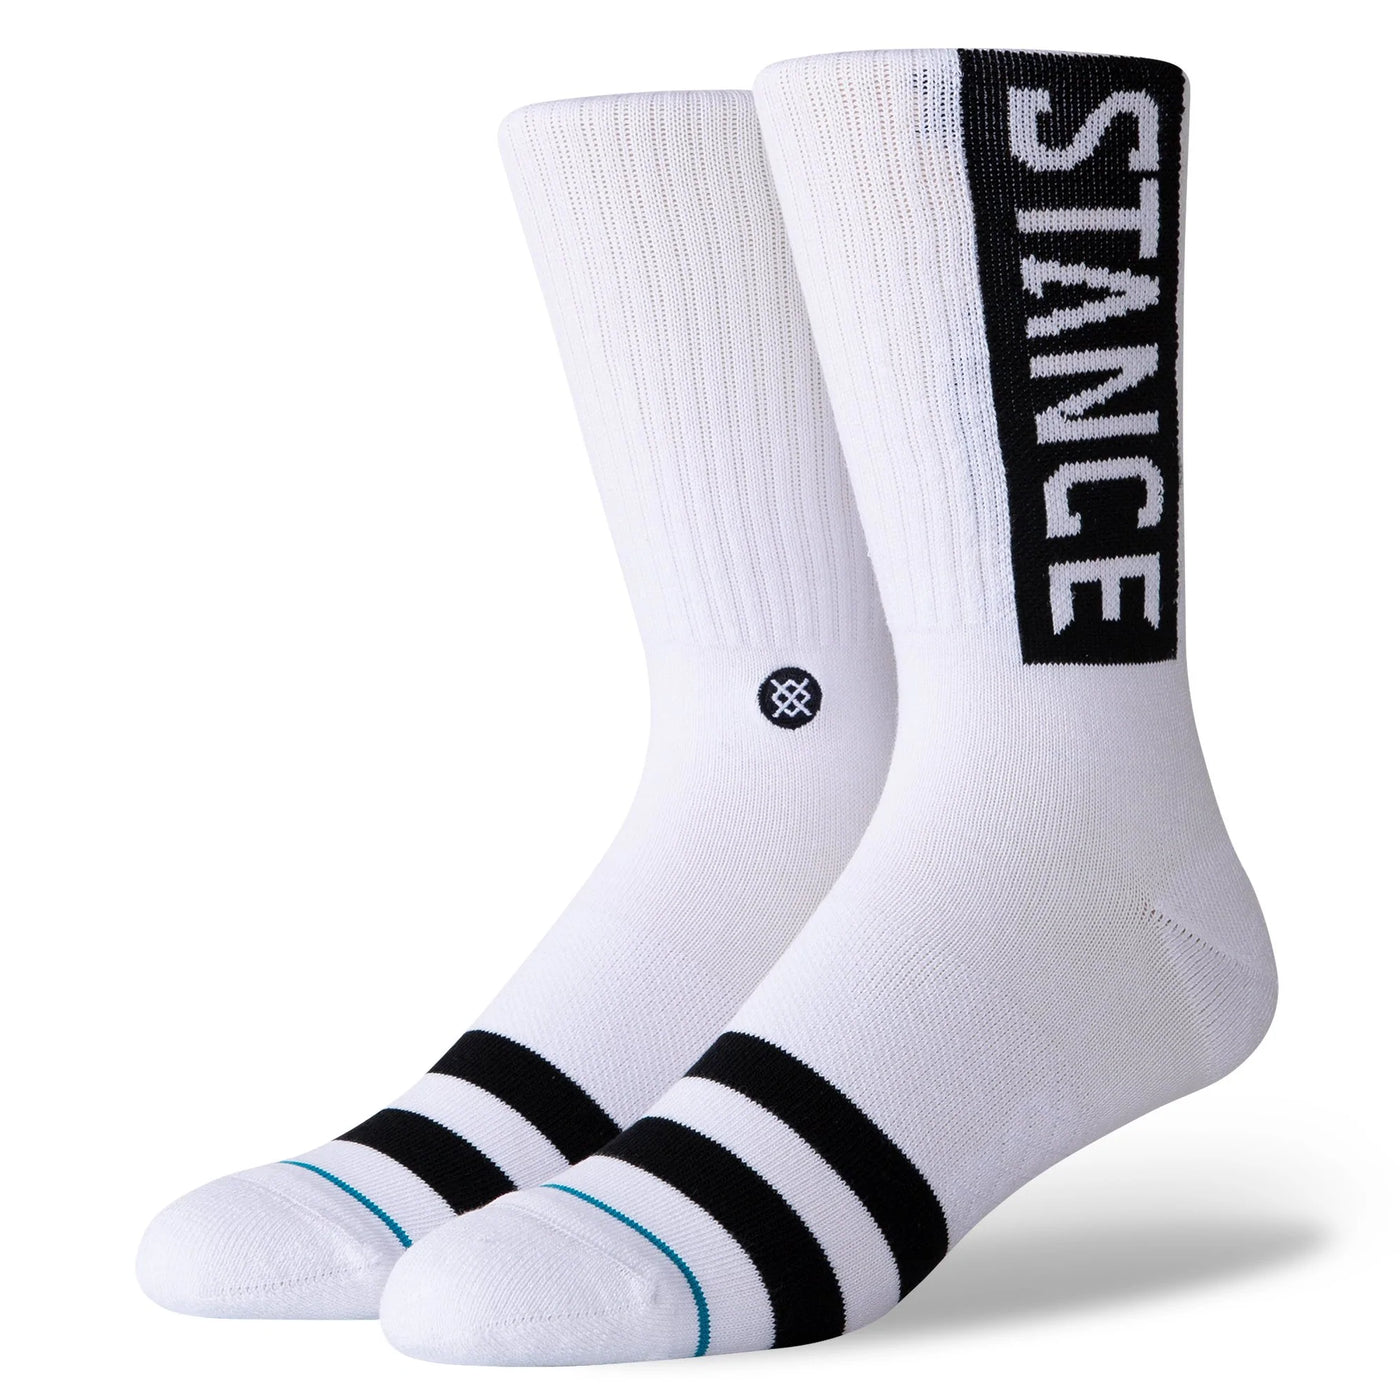 Chaussettes Stance OG Crew blanches